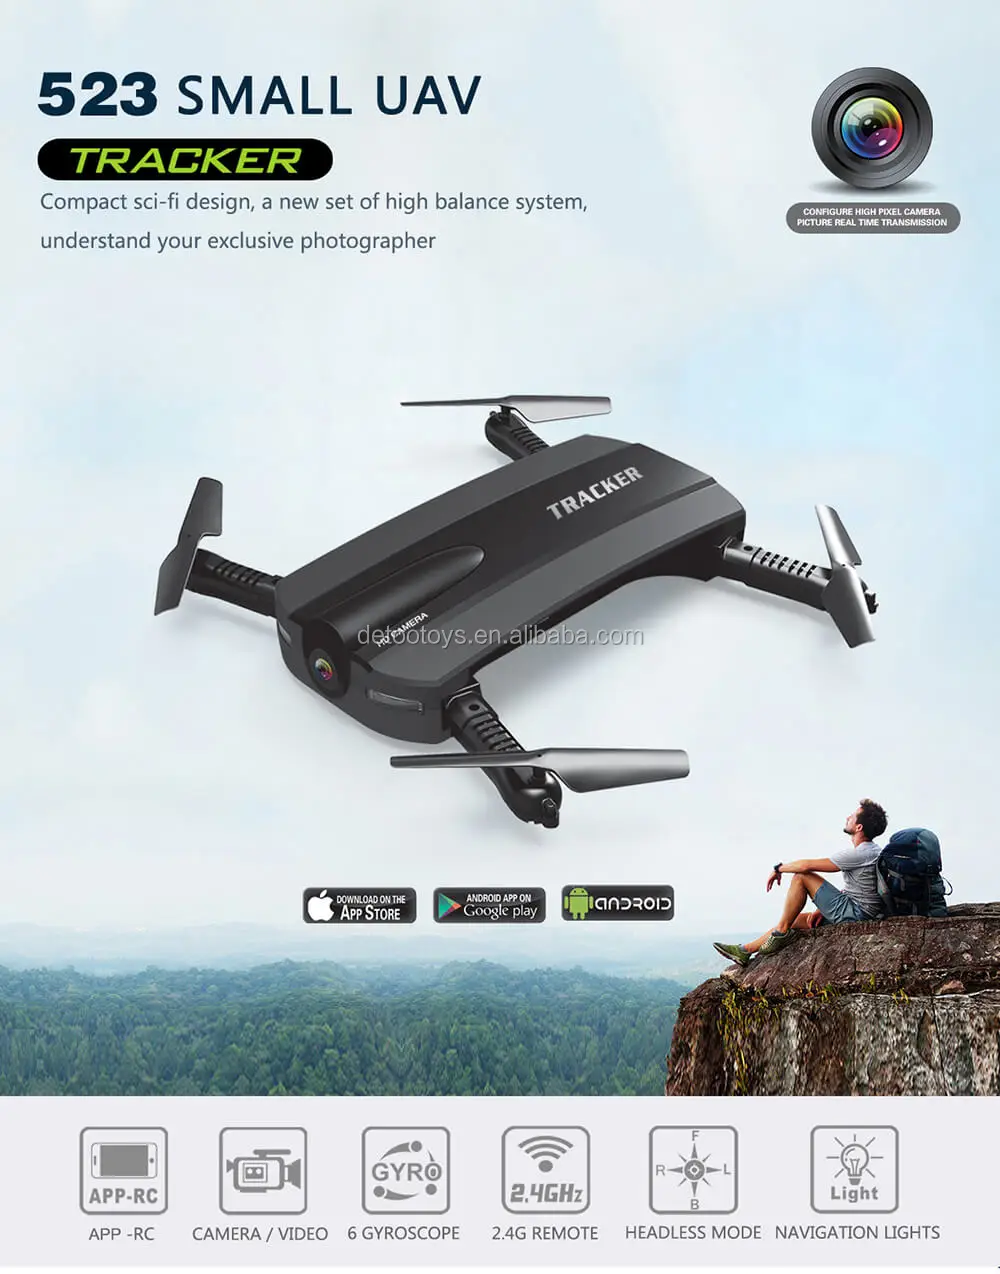 FPV Foldable Helicopter Mini Selfie Drone TY6 Pocket RC Camera Drone 2.4G 4CH 